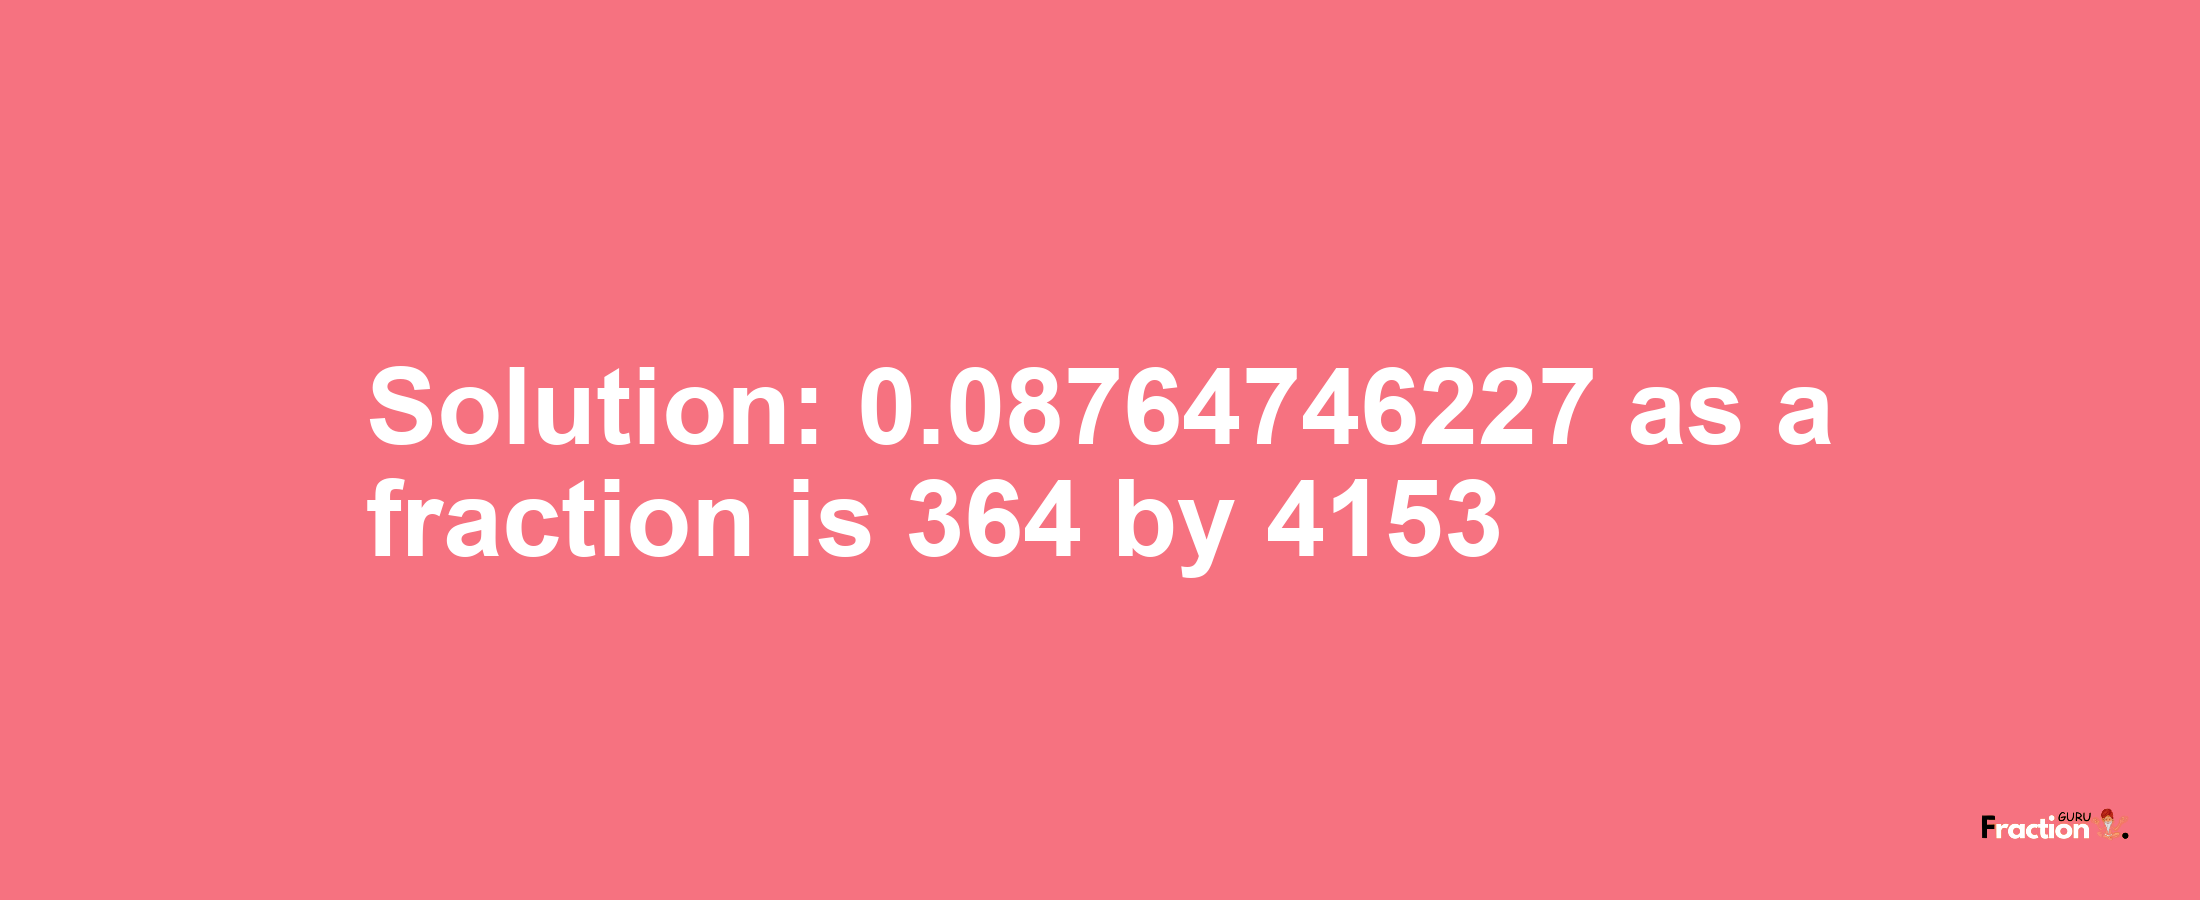 Solution:0.08764746227 as a fraction is 364/4153